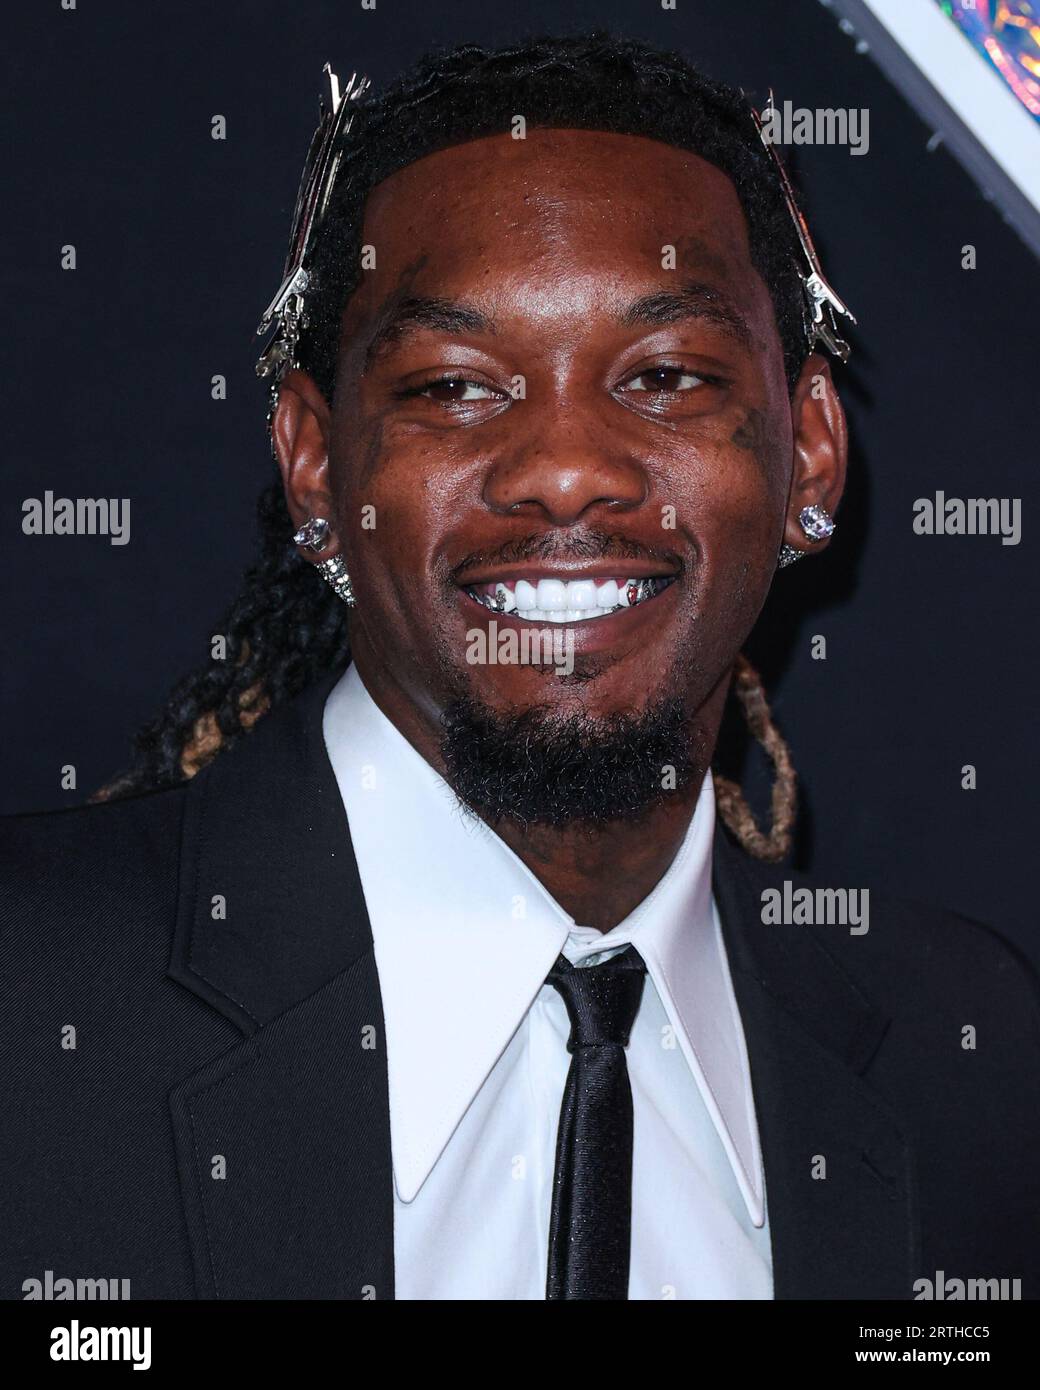 NEWARK, NEW JERSEY, USA - SEPTEMBER 12: Offset arrives at the 2023 MTV Video Music Awards held at the Prudential Center on September 12, 2023 in Newark, New Jersey, United States. (Photo by Xavier Collin/Image Press Agency) Stock Photo